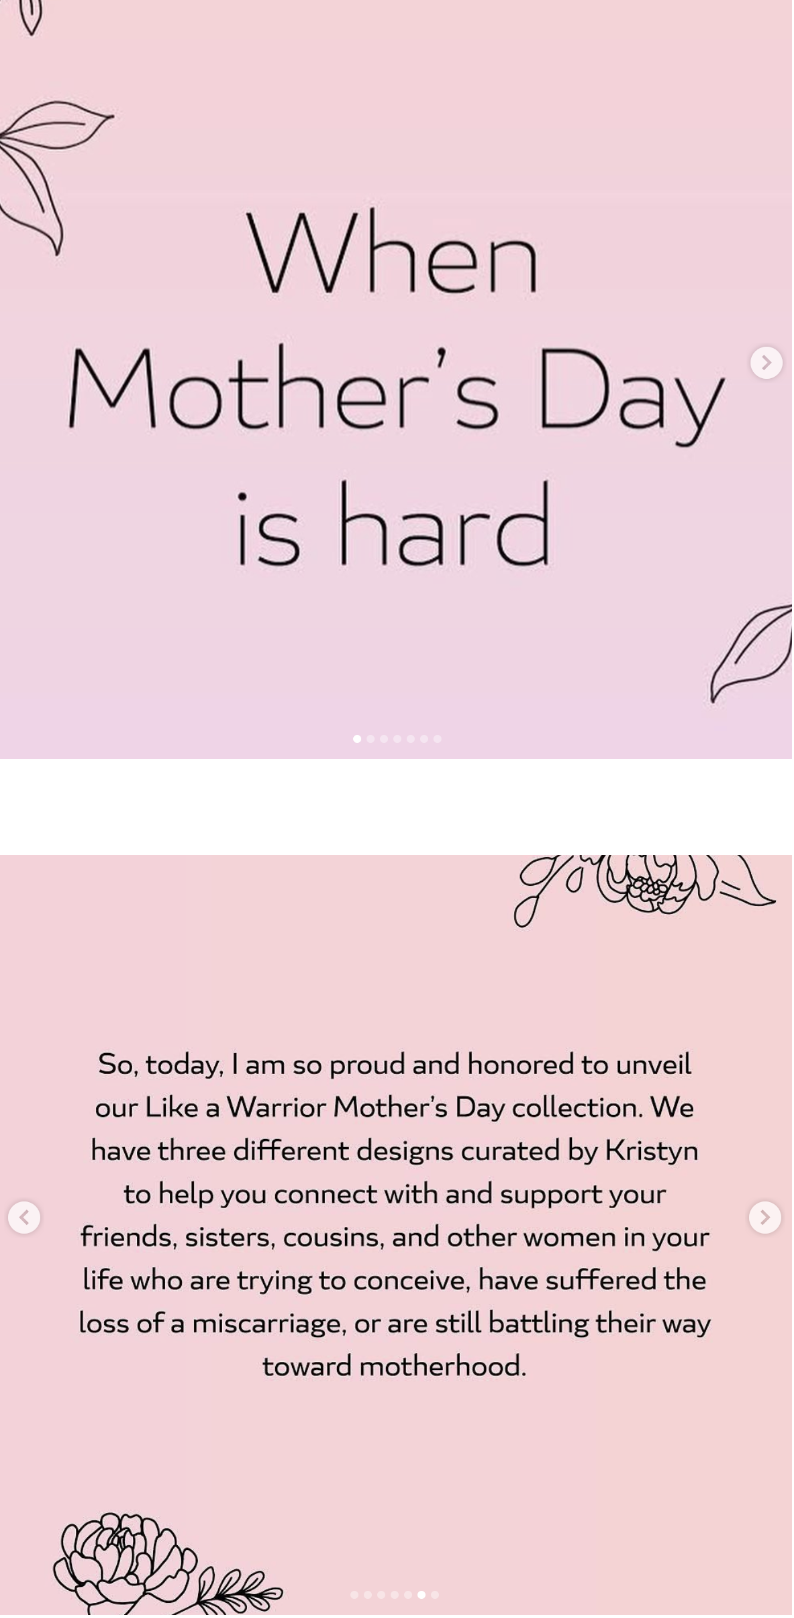 Image shows a Mother’s Day email from Greetabl